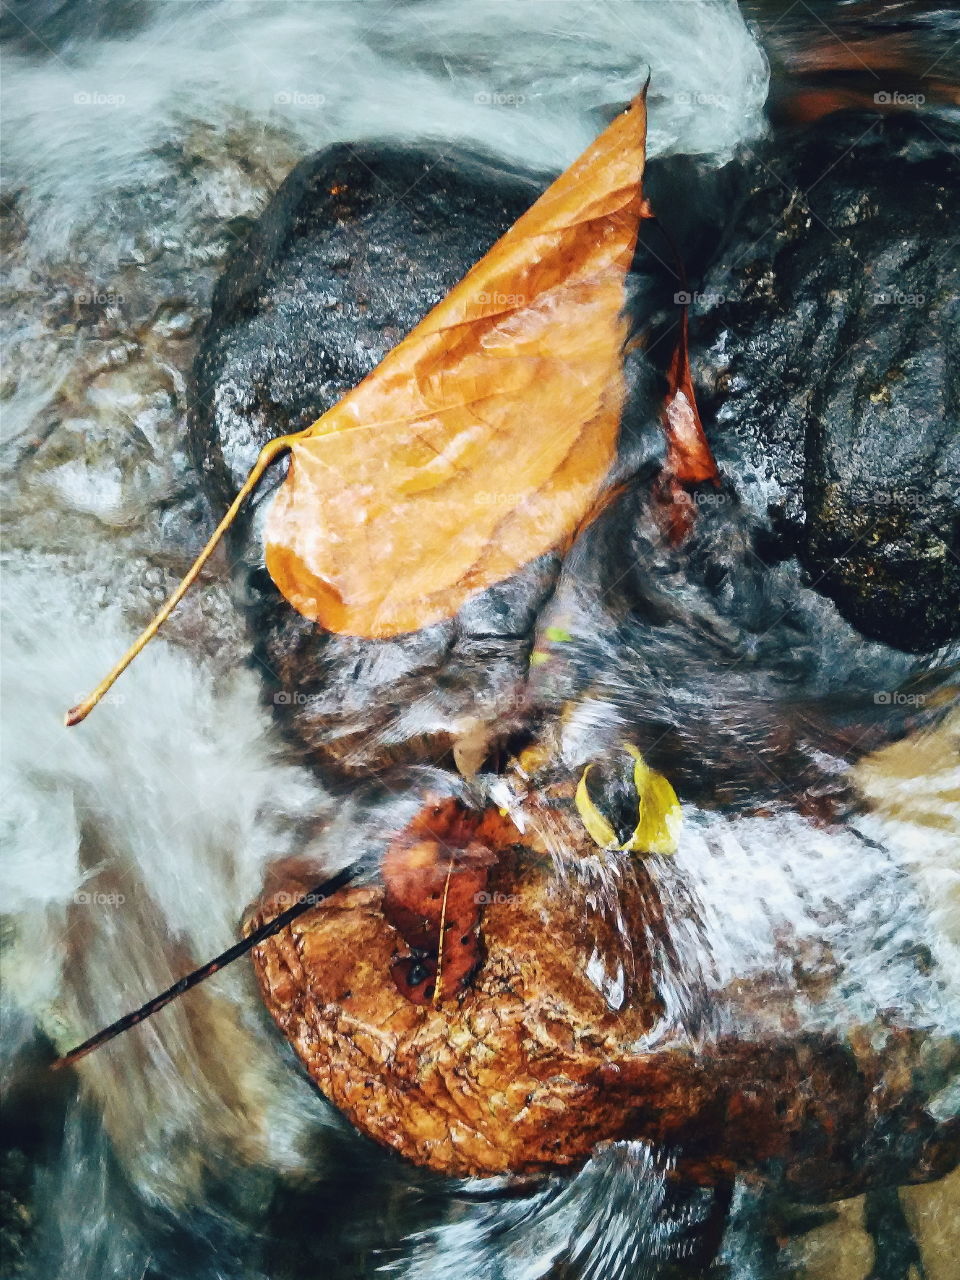 waterfall. Leaves stuck at the stones in a river